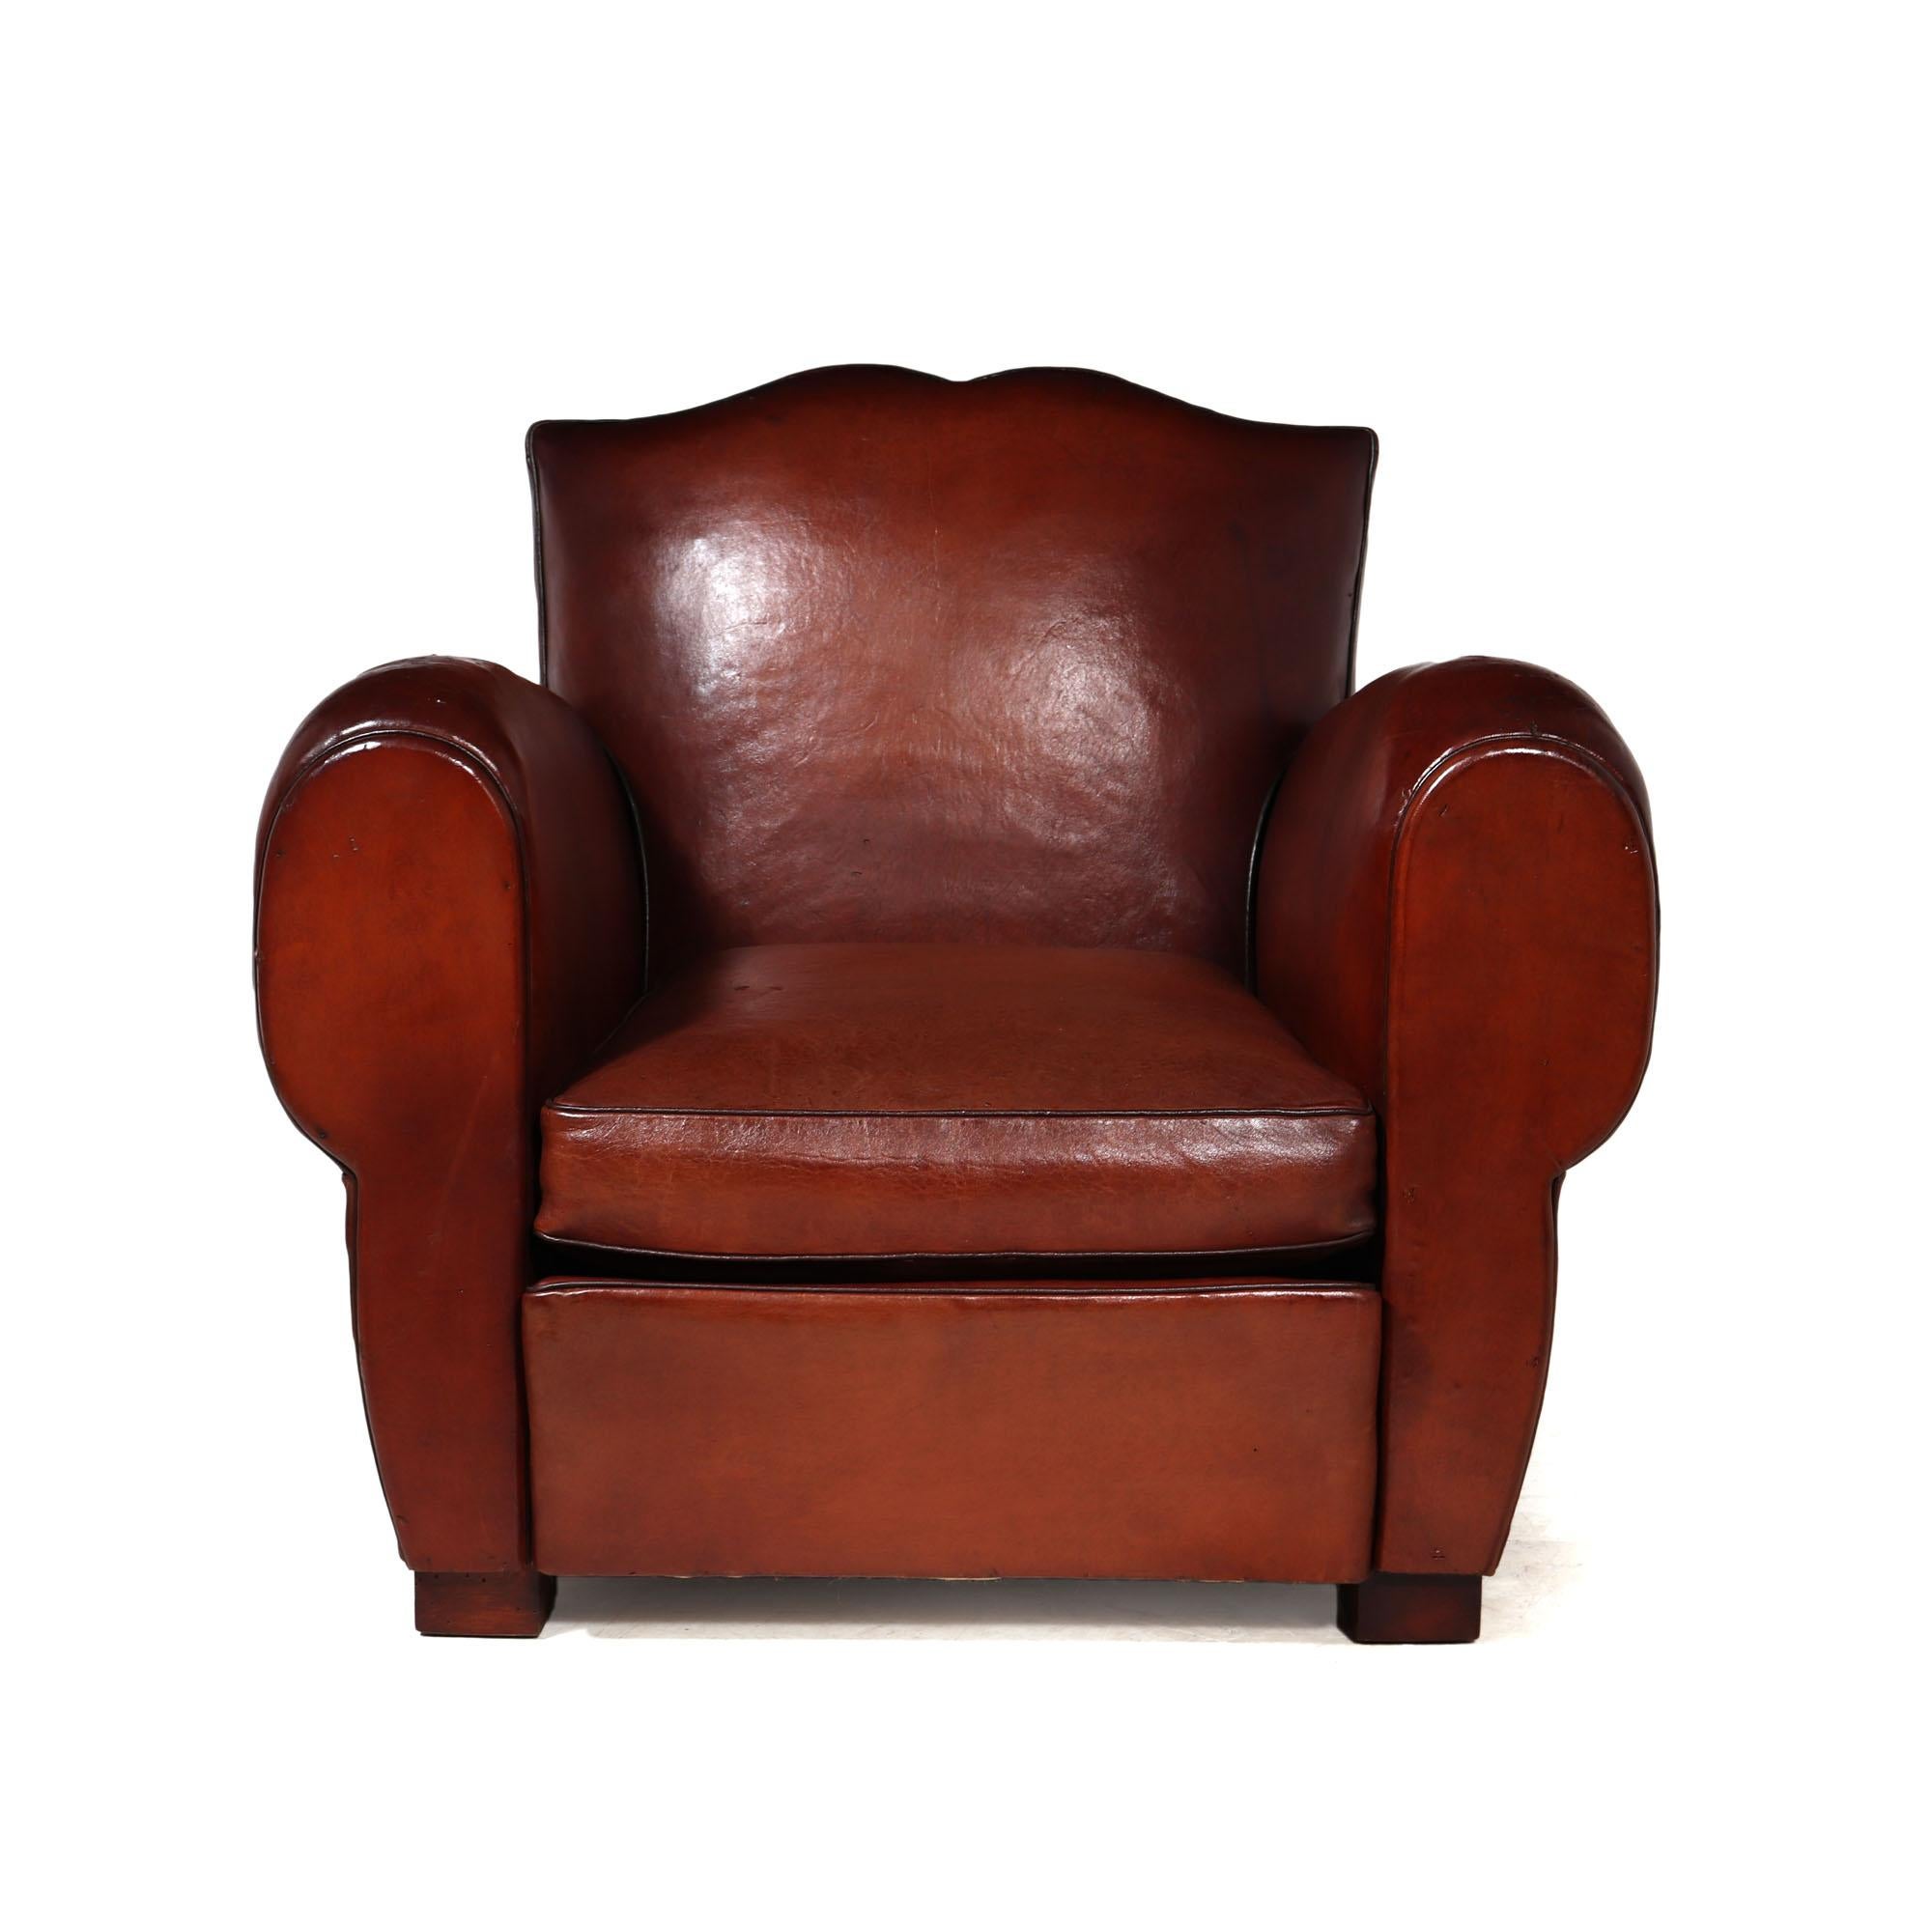 FRENCH LEATHER CLUB CHAIR
This French leather moustache back club chair is the perfect addition to any home. The chair boast high-grade leather upholstery that has undergone treatment and sealing, ensuring durability for the years ahead. The sturdy